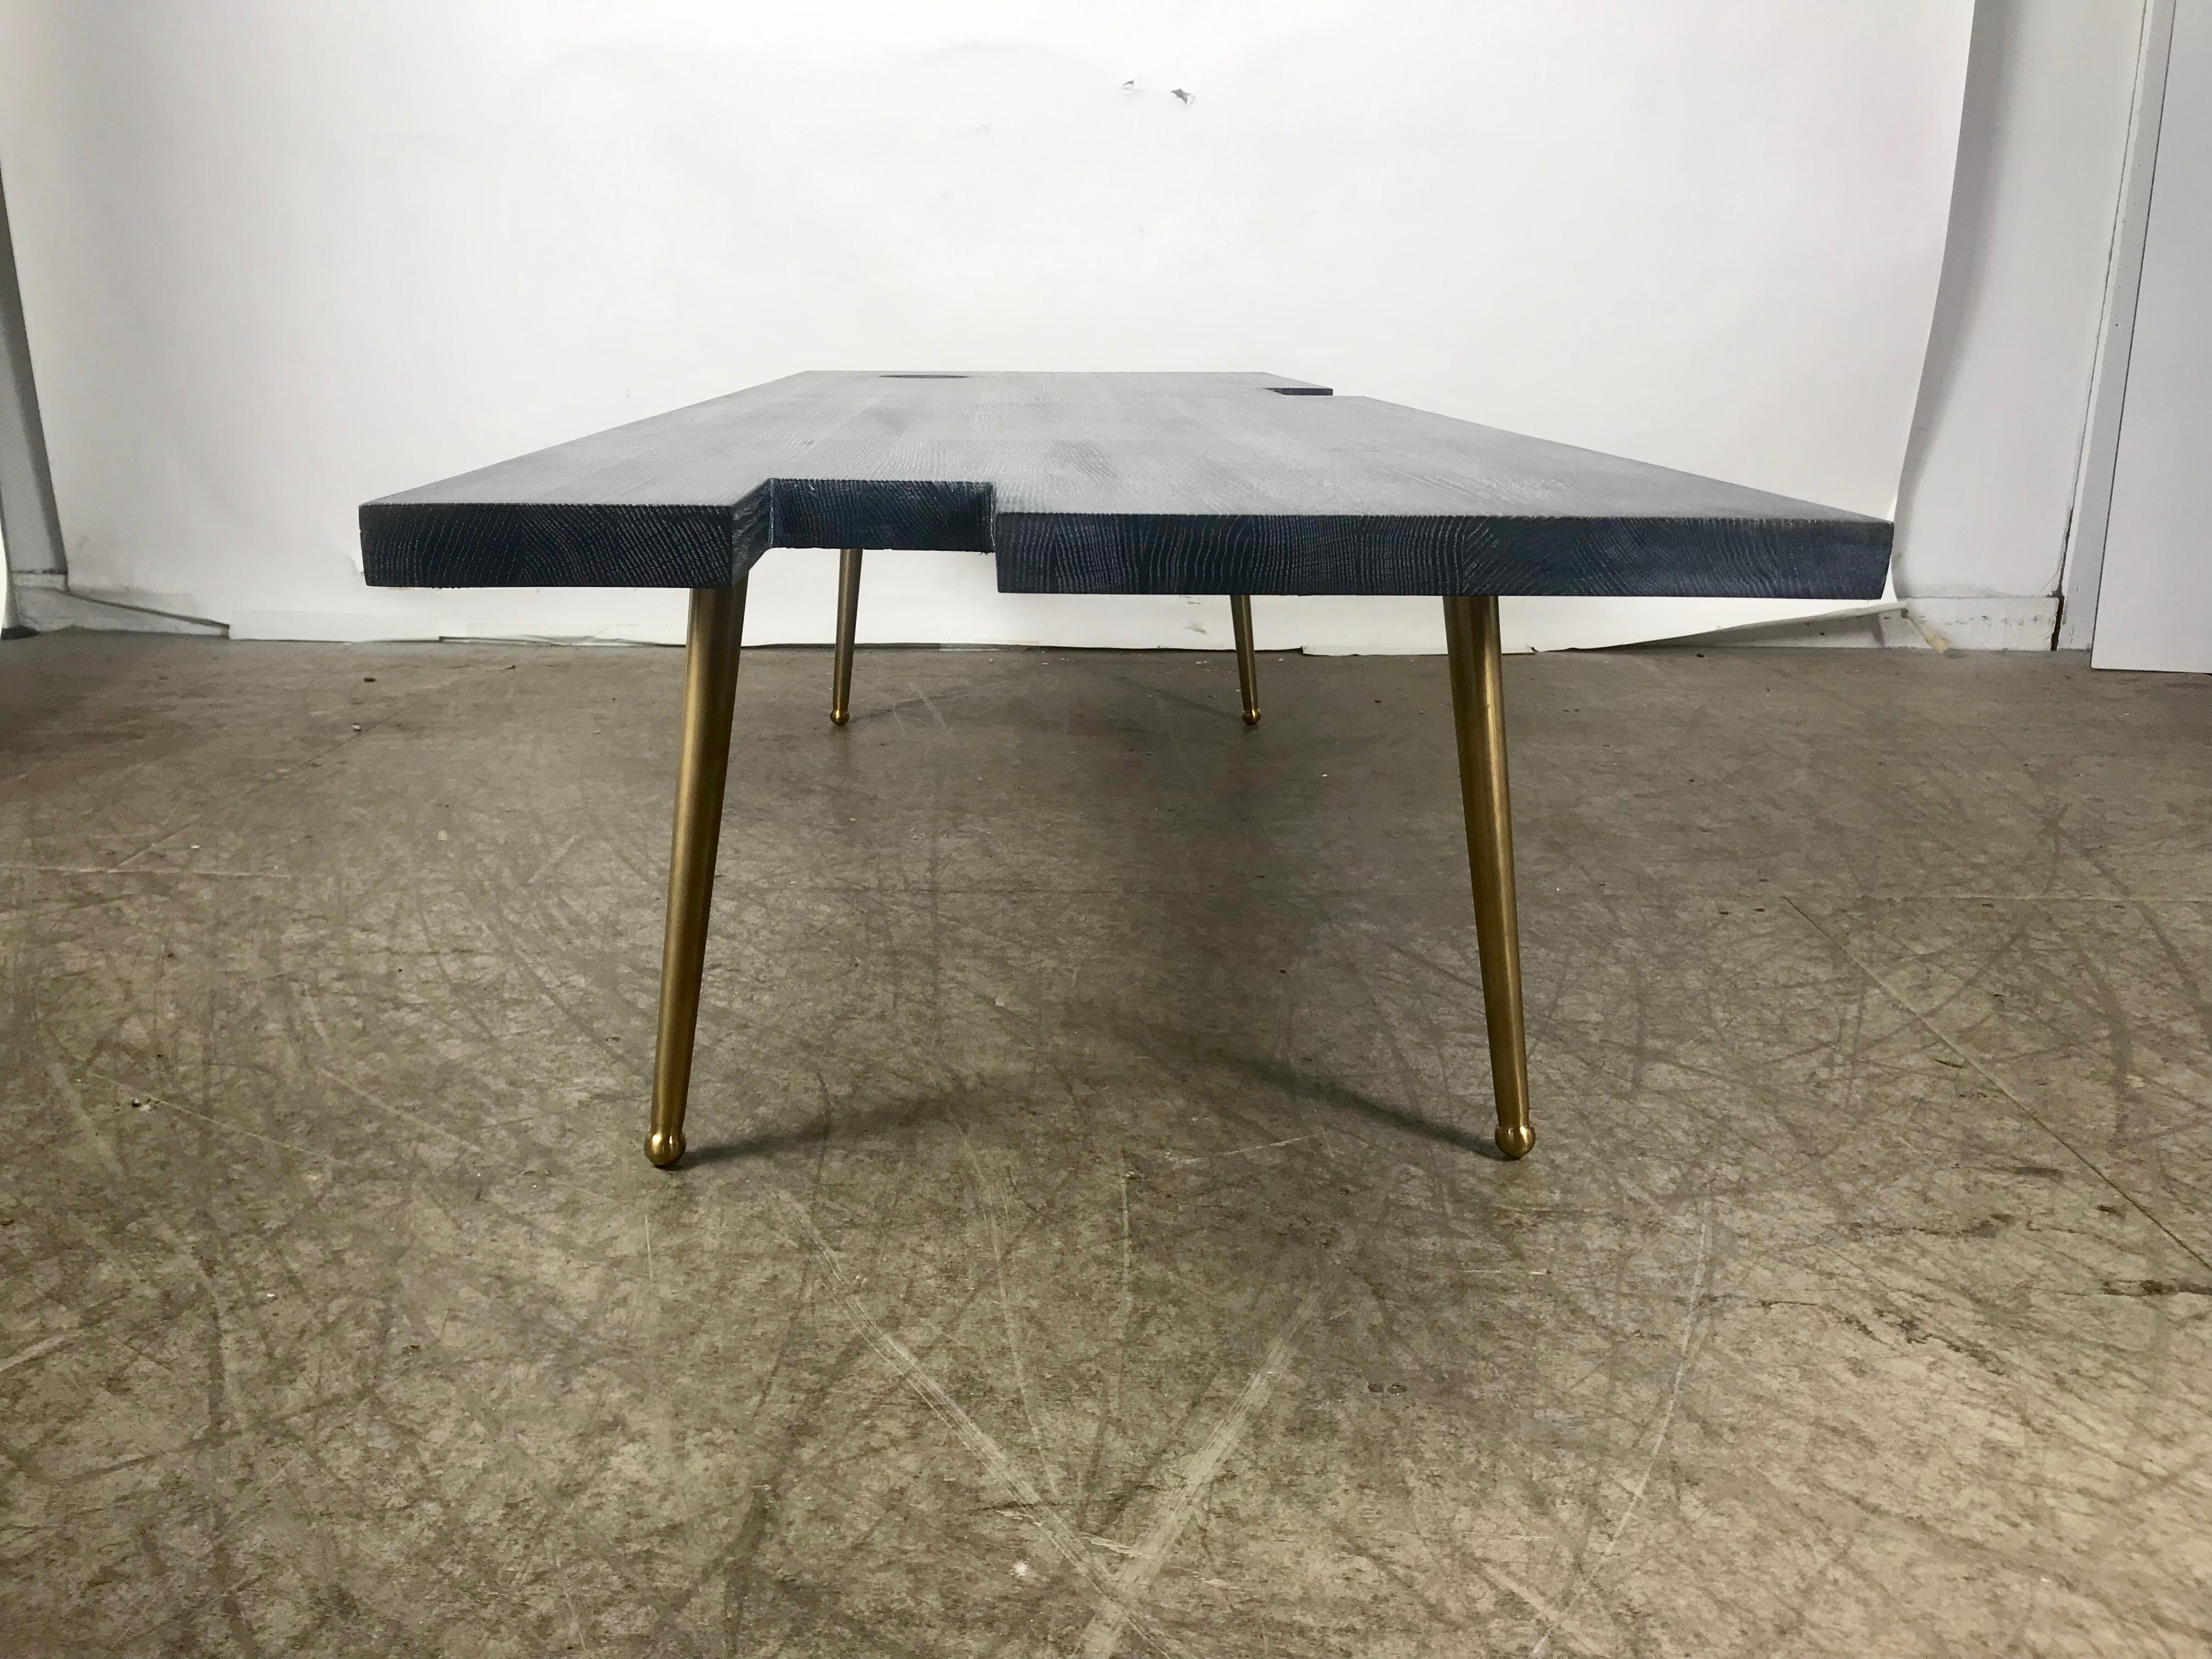 Modernist Bespoke Cerused Oak Coffee/Cocktail Table Designed by John Tracey In Good Condition For Sale In Buffalo, NY